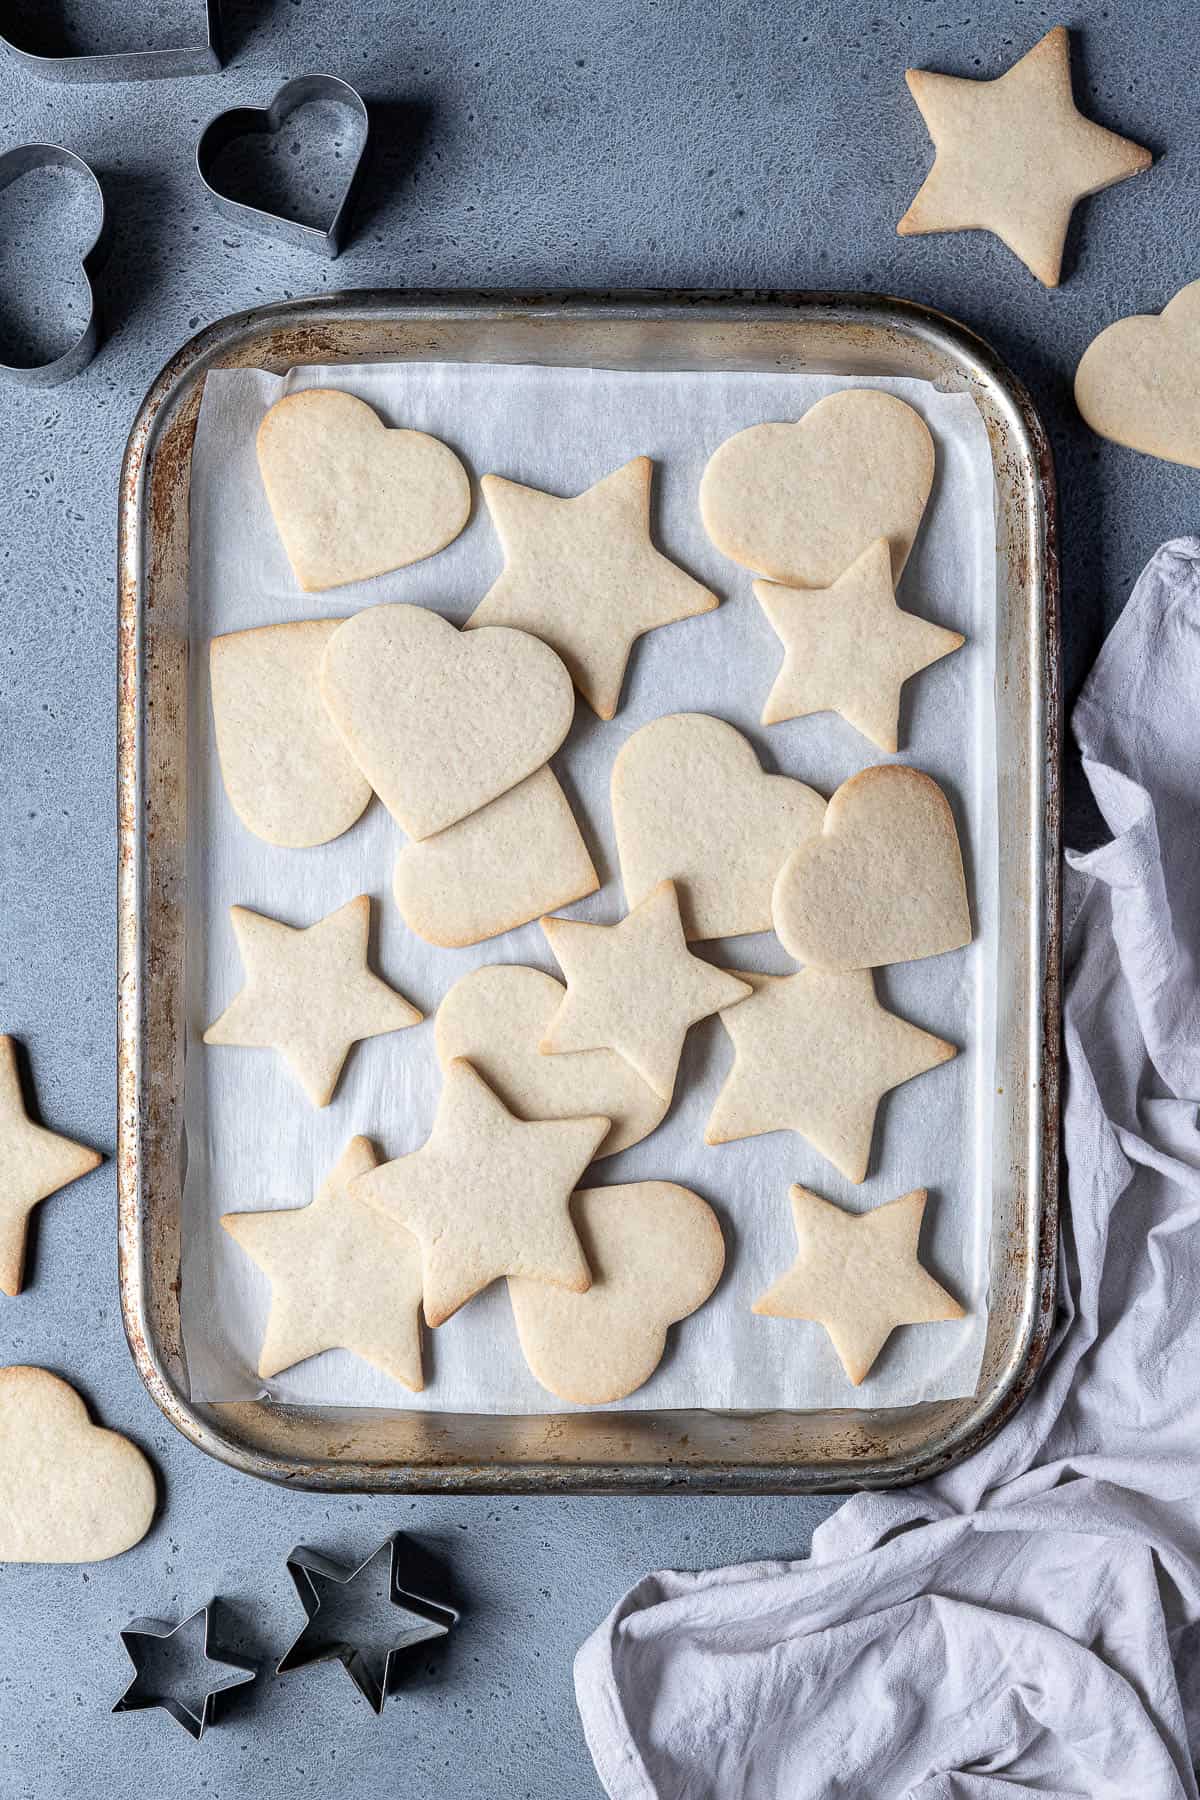 Vegan vanilla sugar cookies on a meatl baking tray with cookie cutters and a grey cloth.